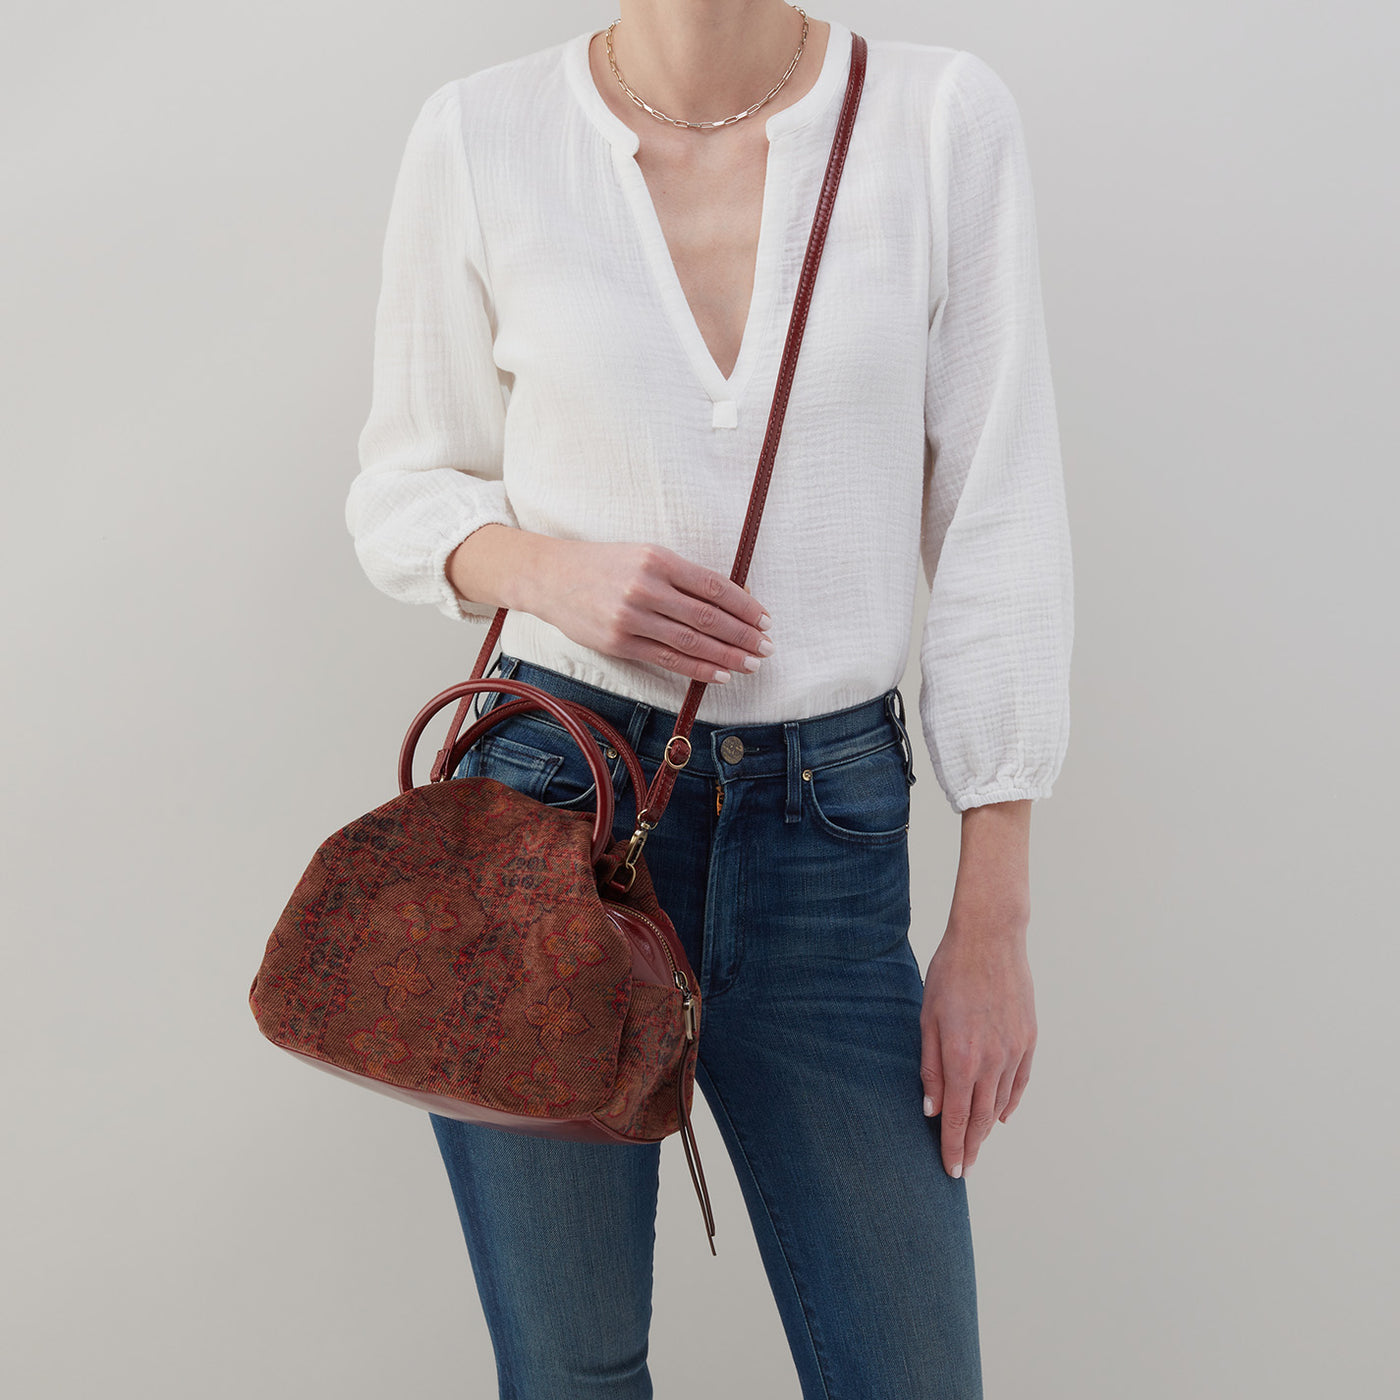 Darling Small Satchel in Soft Leather - Provence – HOBO